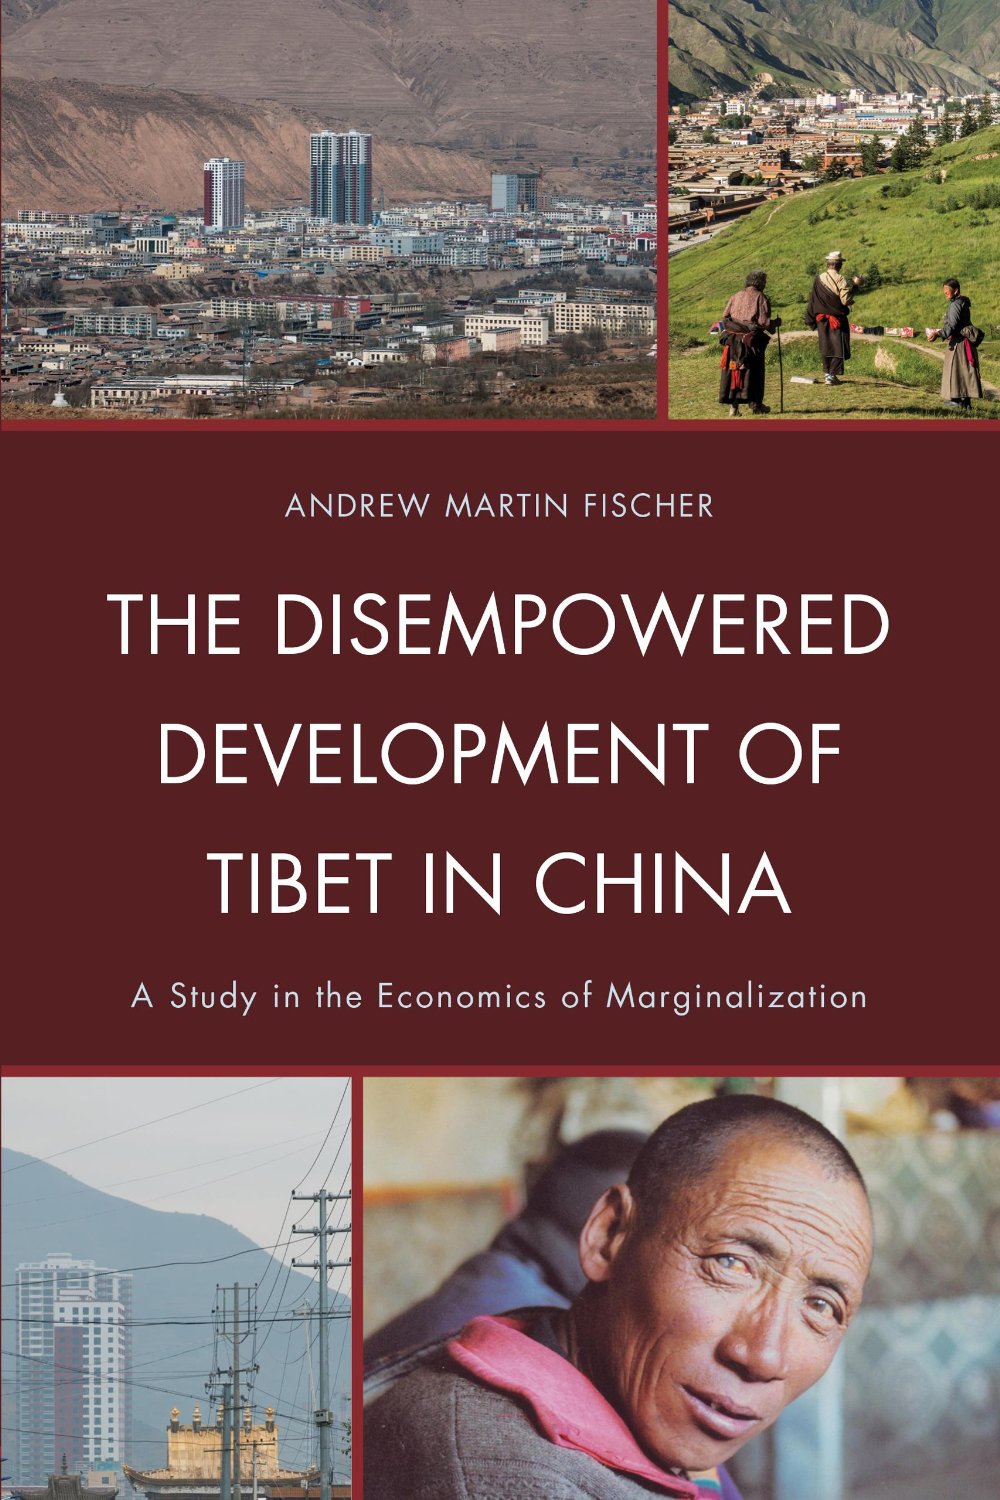 High Peaks Pure Earth – “The Disempowered Development of Tibet in China ...